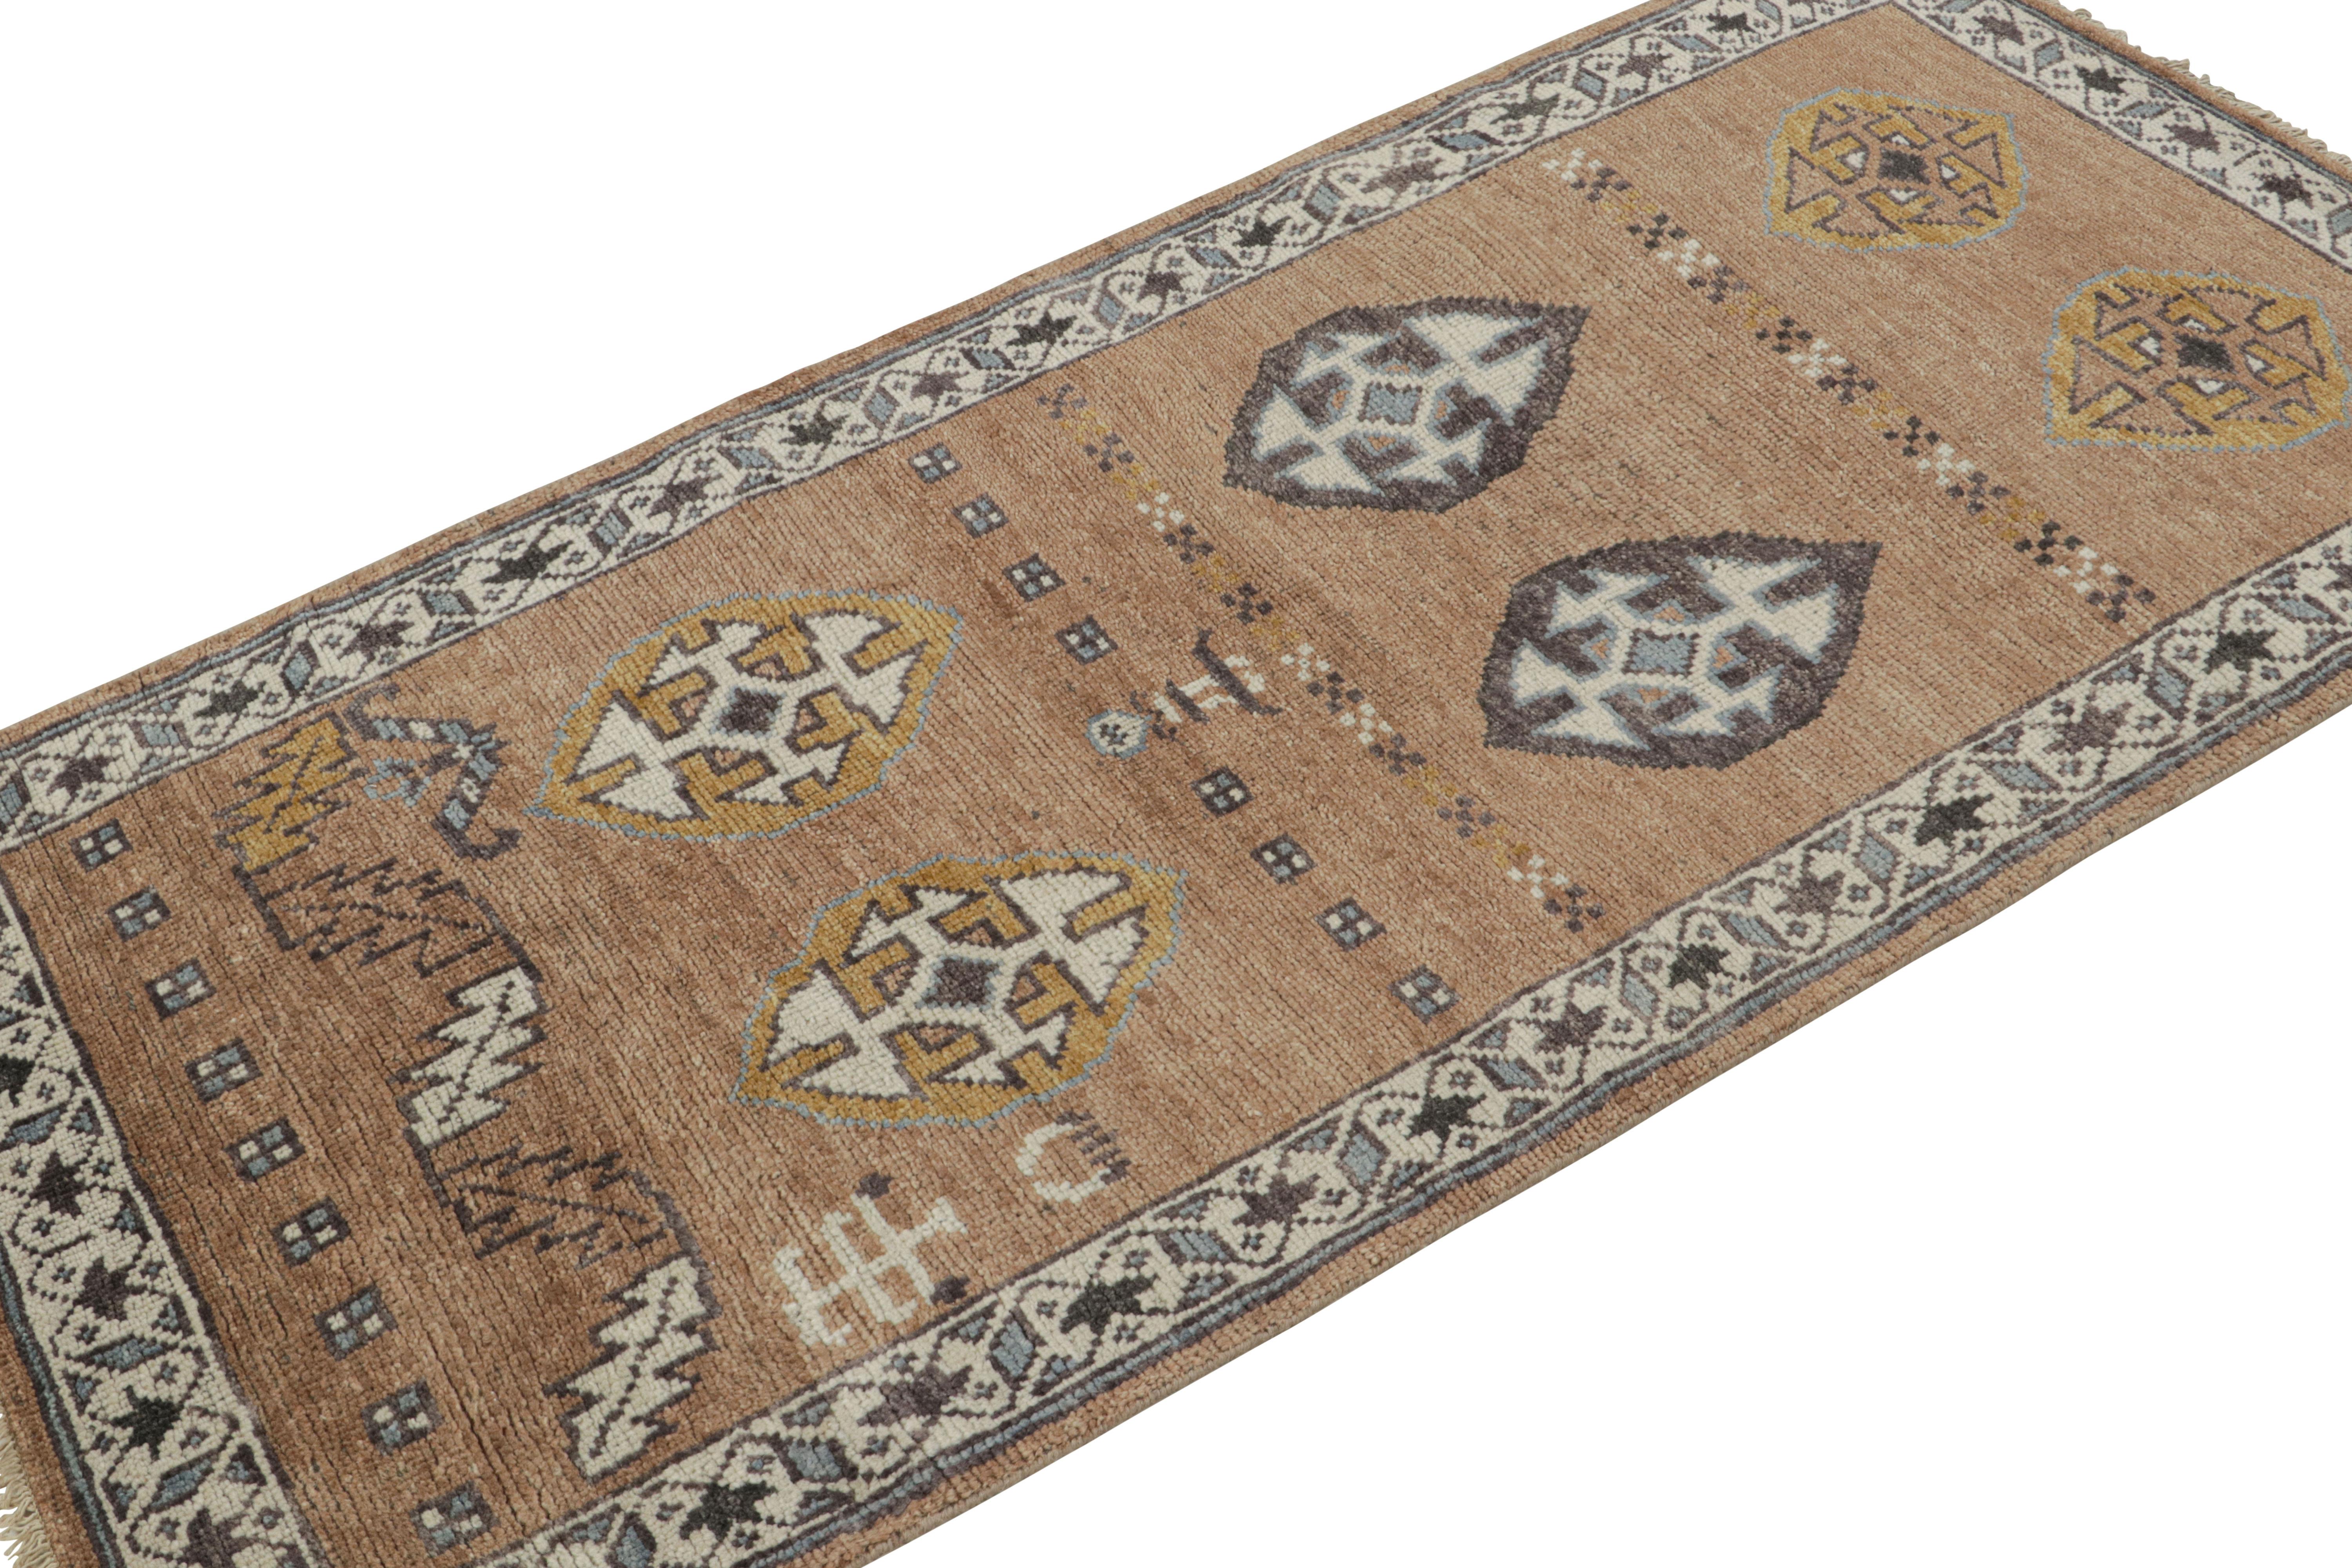 As inspired by nomadic tribal rugs, especially like that of Persian Gabbeh rugs, this 3x6 modern rug from our Burano collection is hand knotted in wool. 

On the Design: 

Particularly inspired by the nomadic tribal pieces, it features an archaic